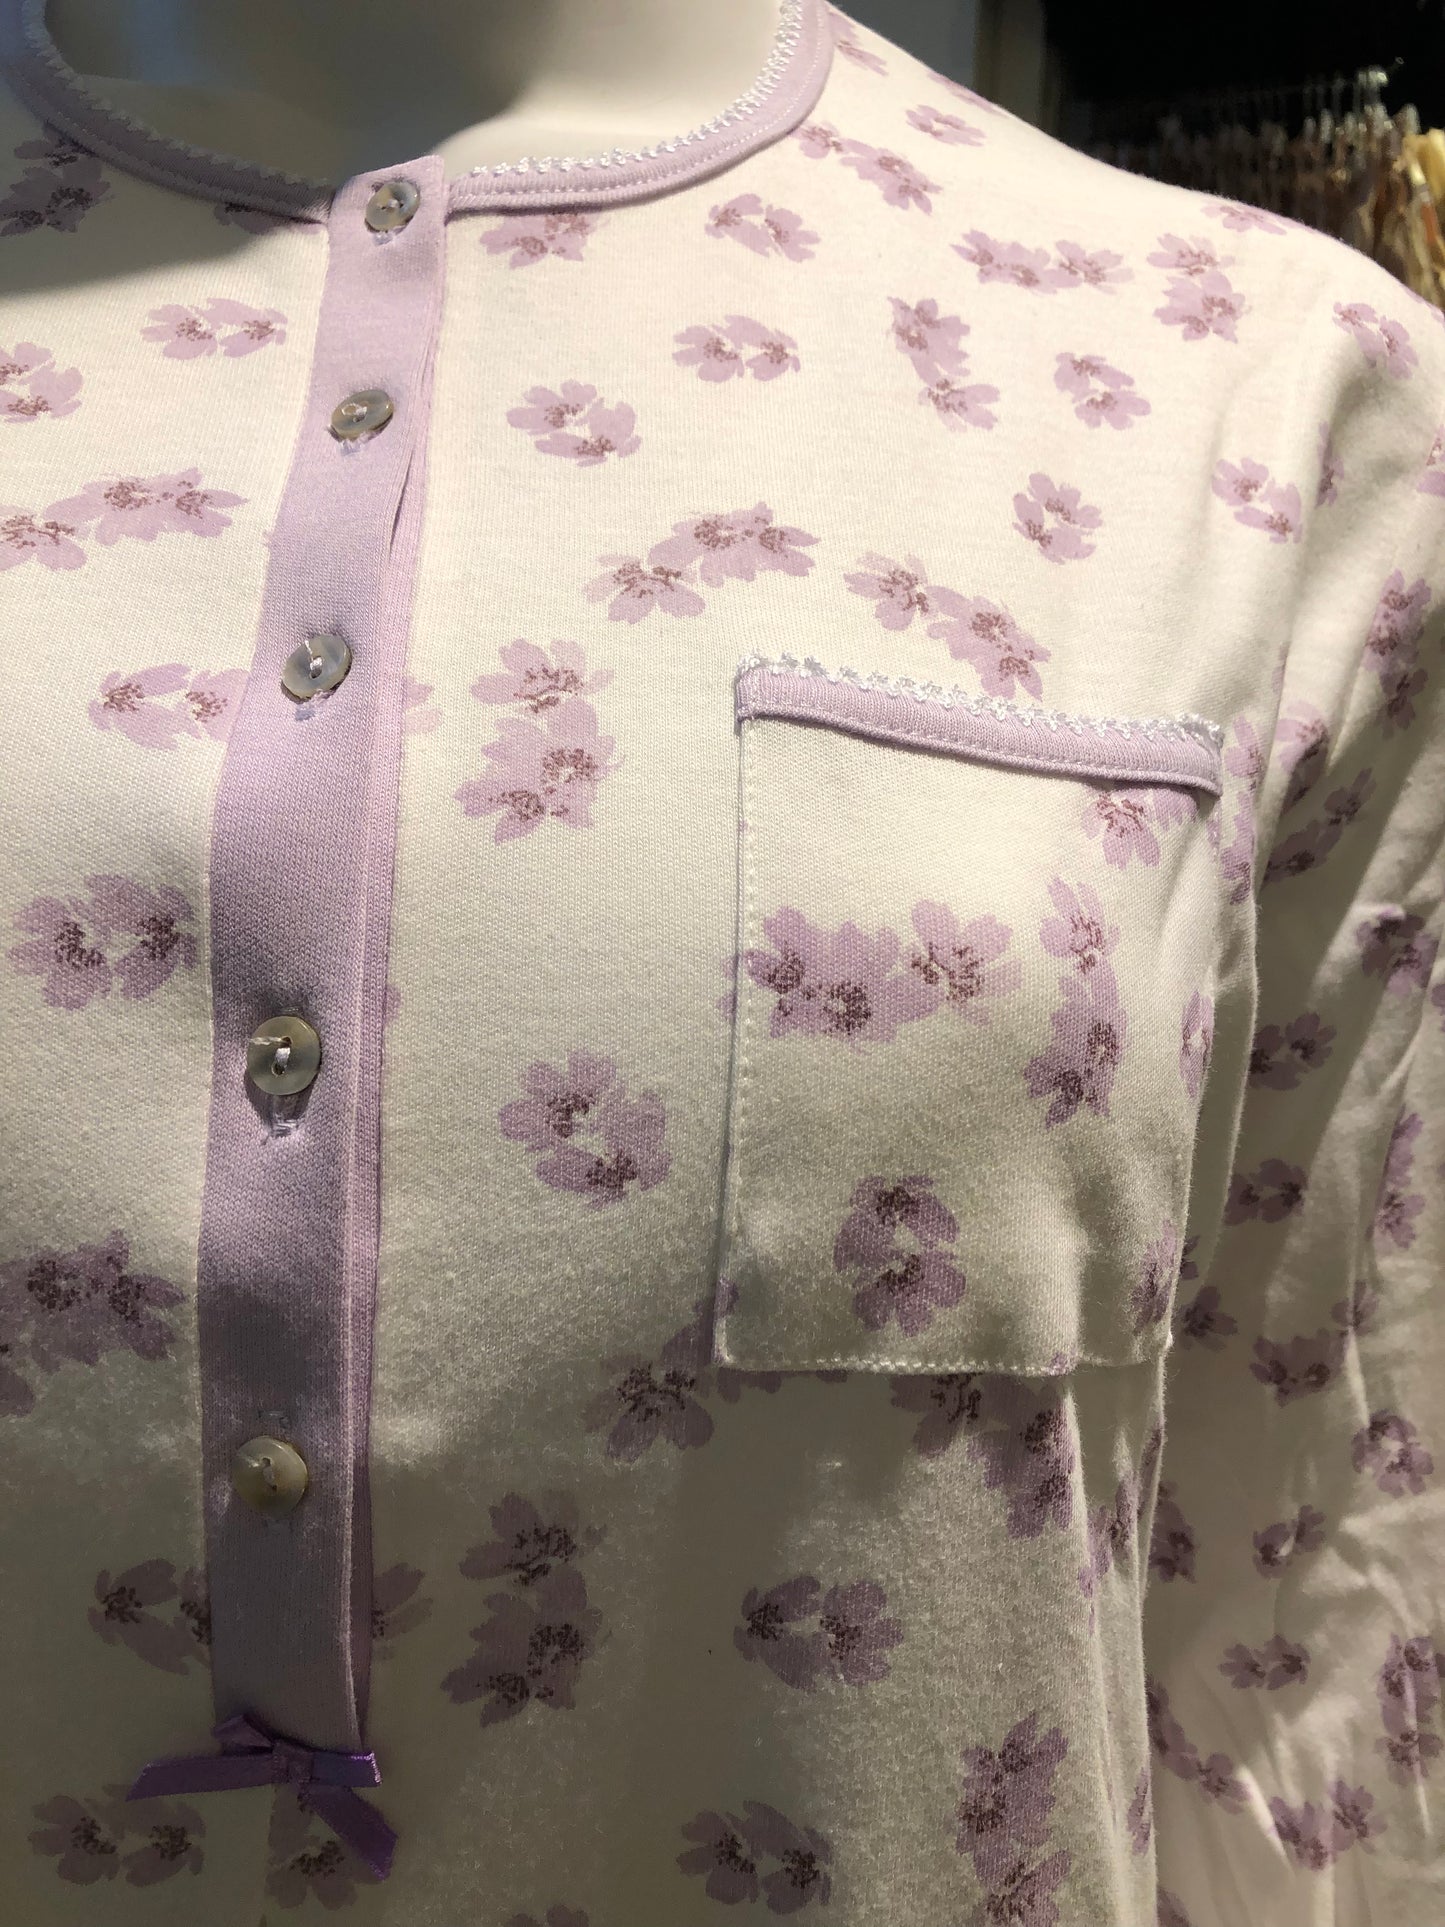 100% Cotton Long Sleeve Nightgown 51203 - Lavender Floral (Glicine)